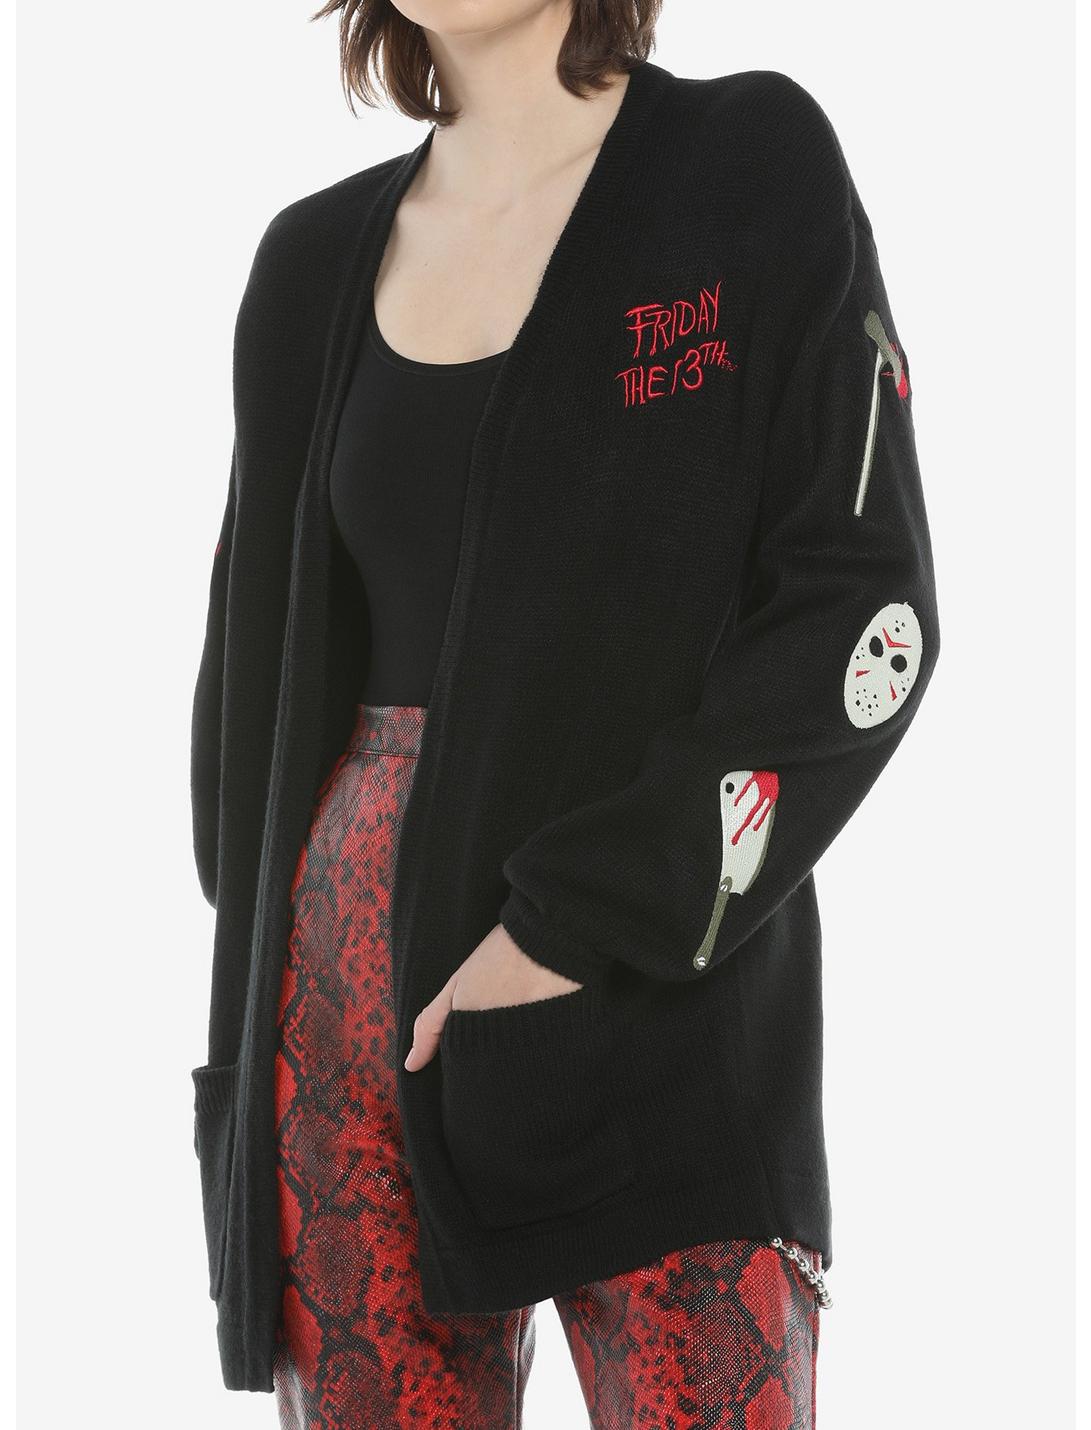 Friday The 13th Icons Girls Open Cardigan, MULTI, hi-res